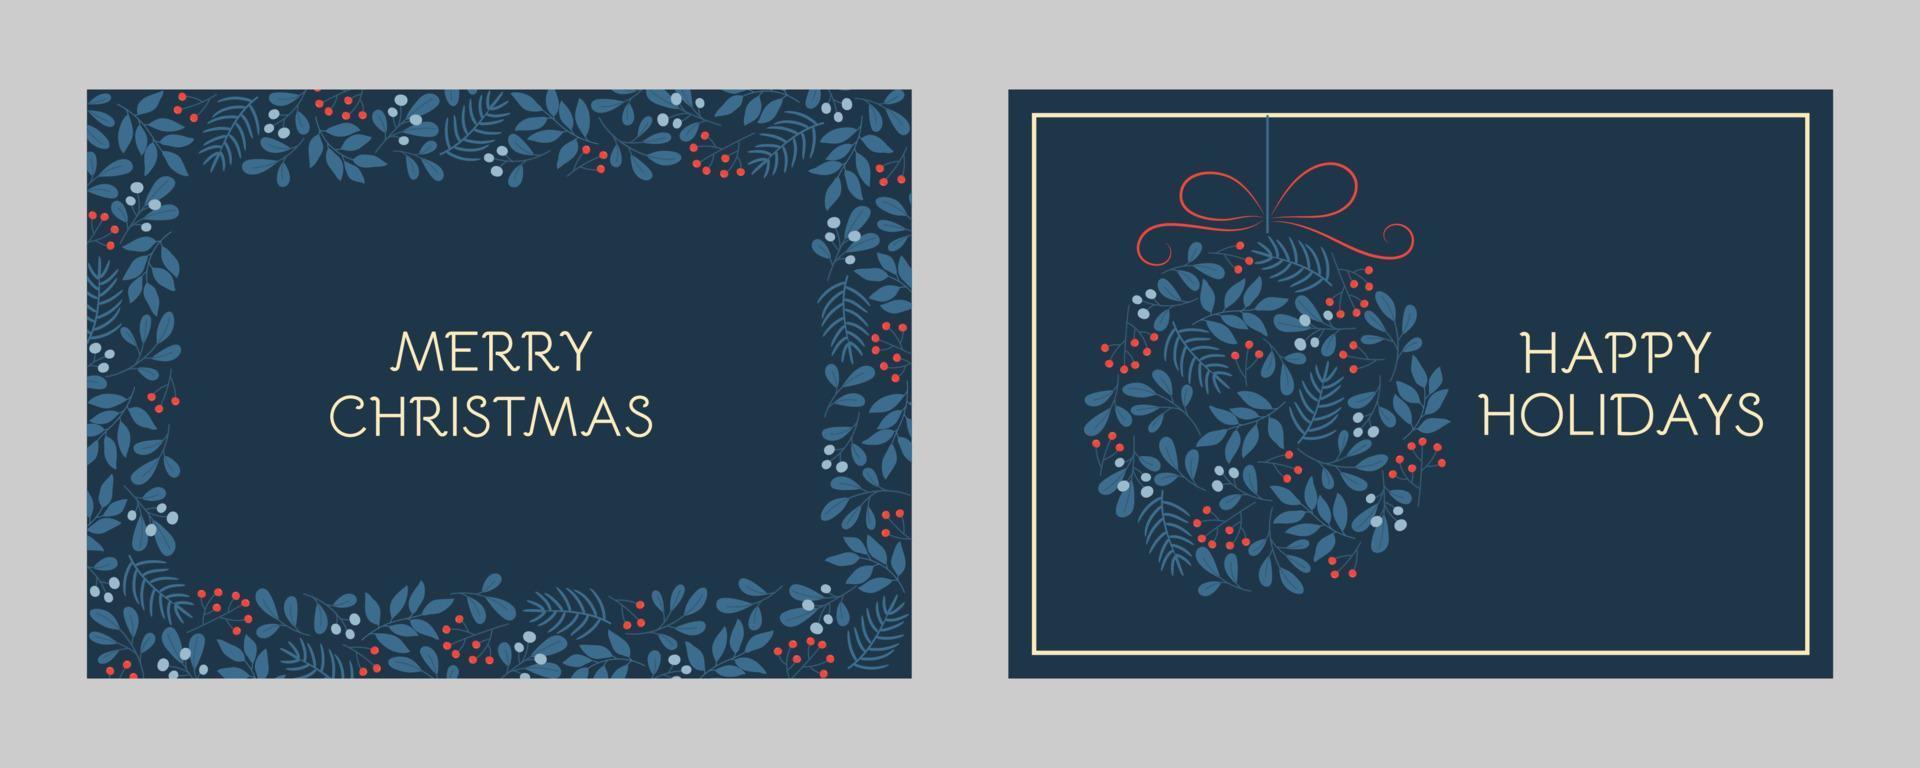 Set of holidays greeting cards with floral frames and Christmas ornament. Winter twigs patterns in blue colors vector